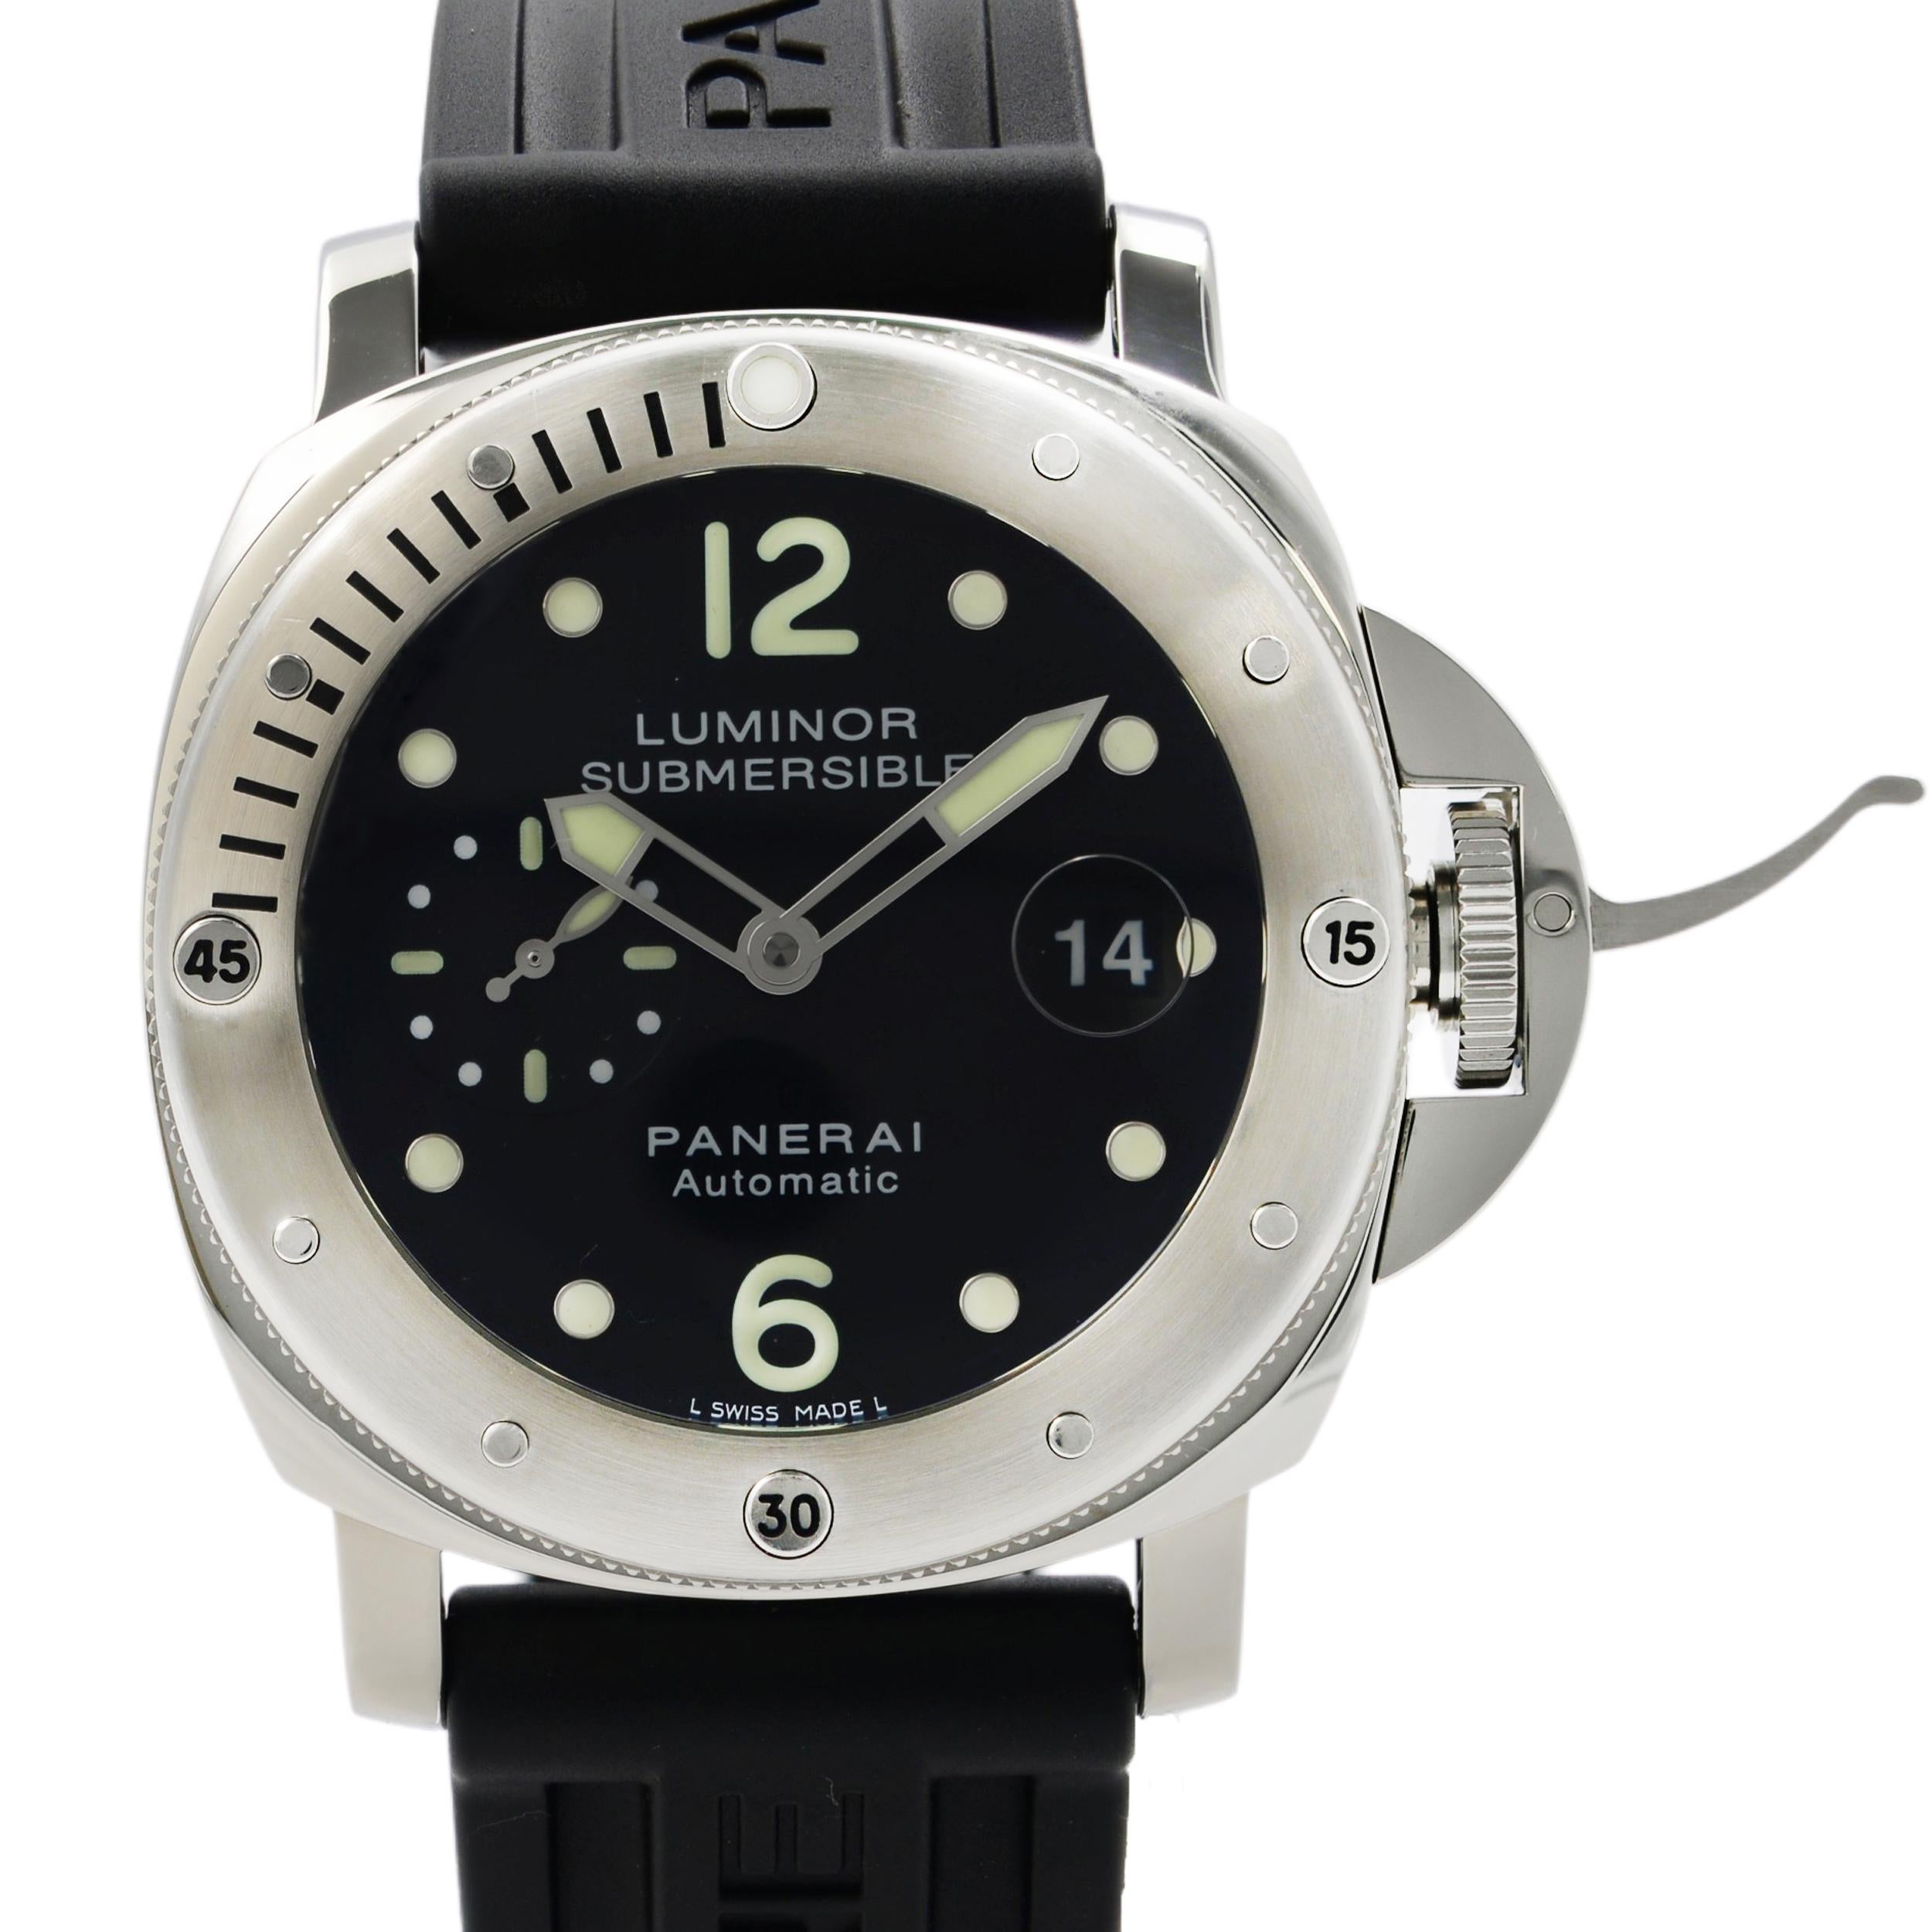 This pre-owned Panerai Luminor Submersible PAM00024 is a beautiful men's timepiece that is powered by a mechanical (Automatic) movement which is cased in a stainless steel case. It has a round shape face, date indicator, small seconds subdial dial